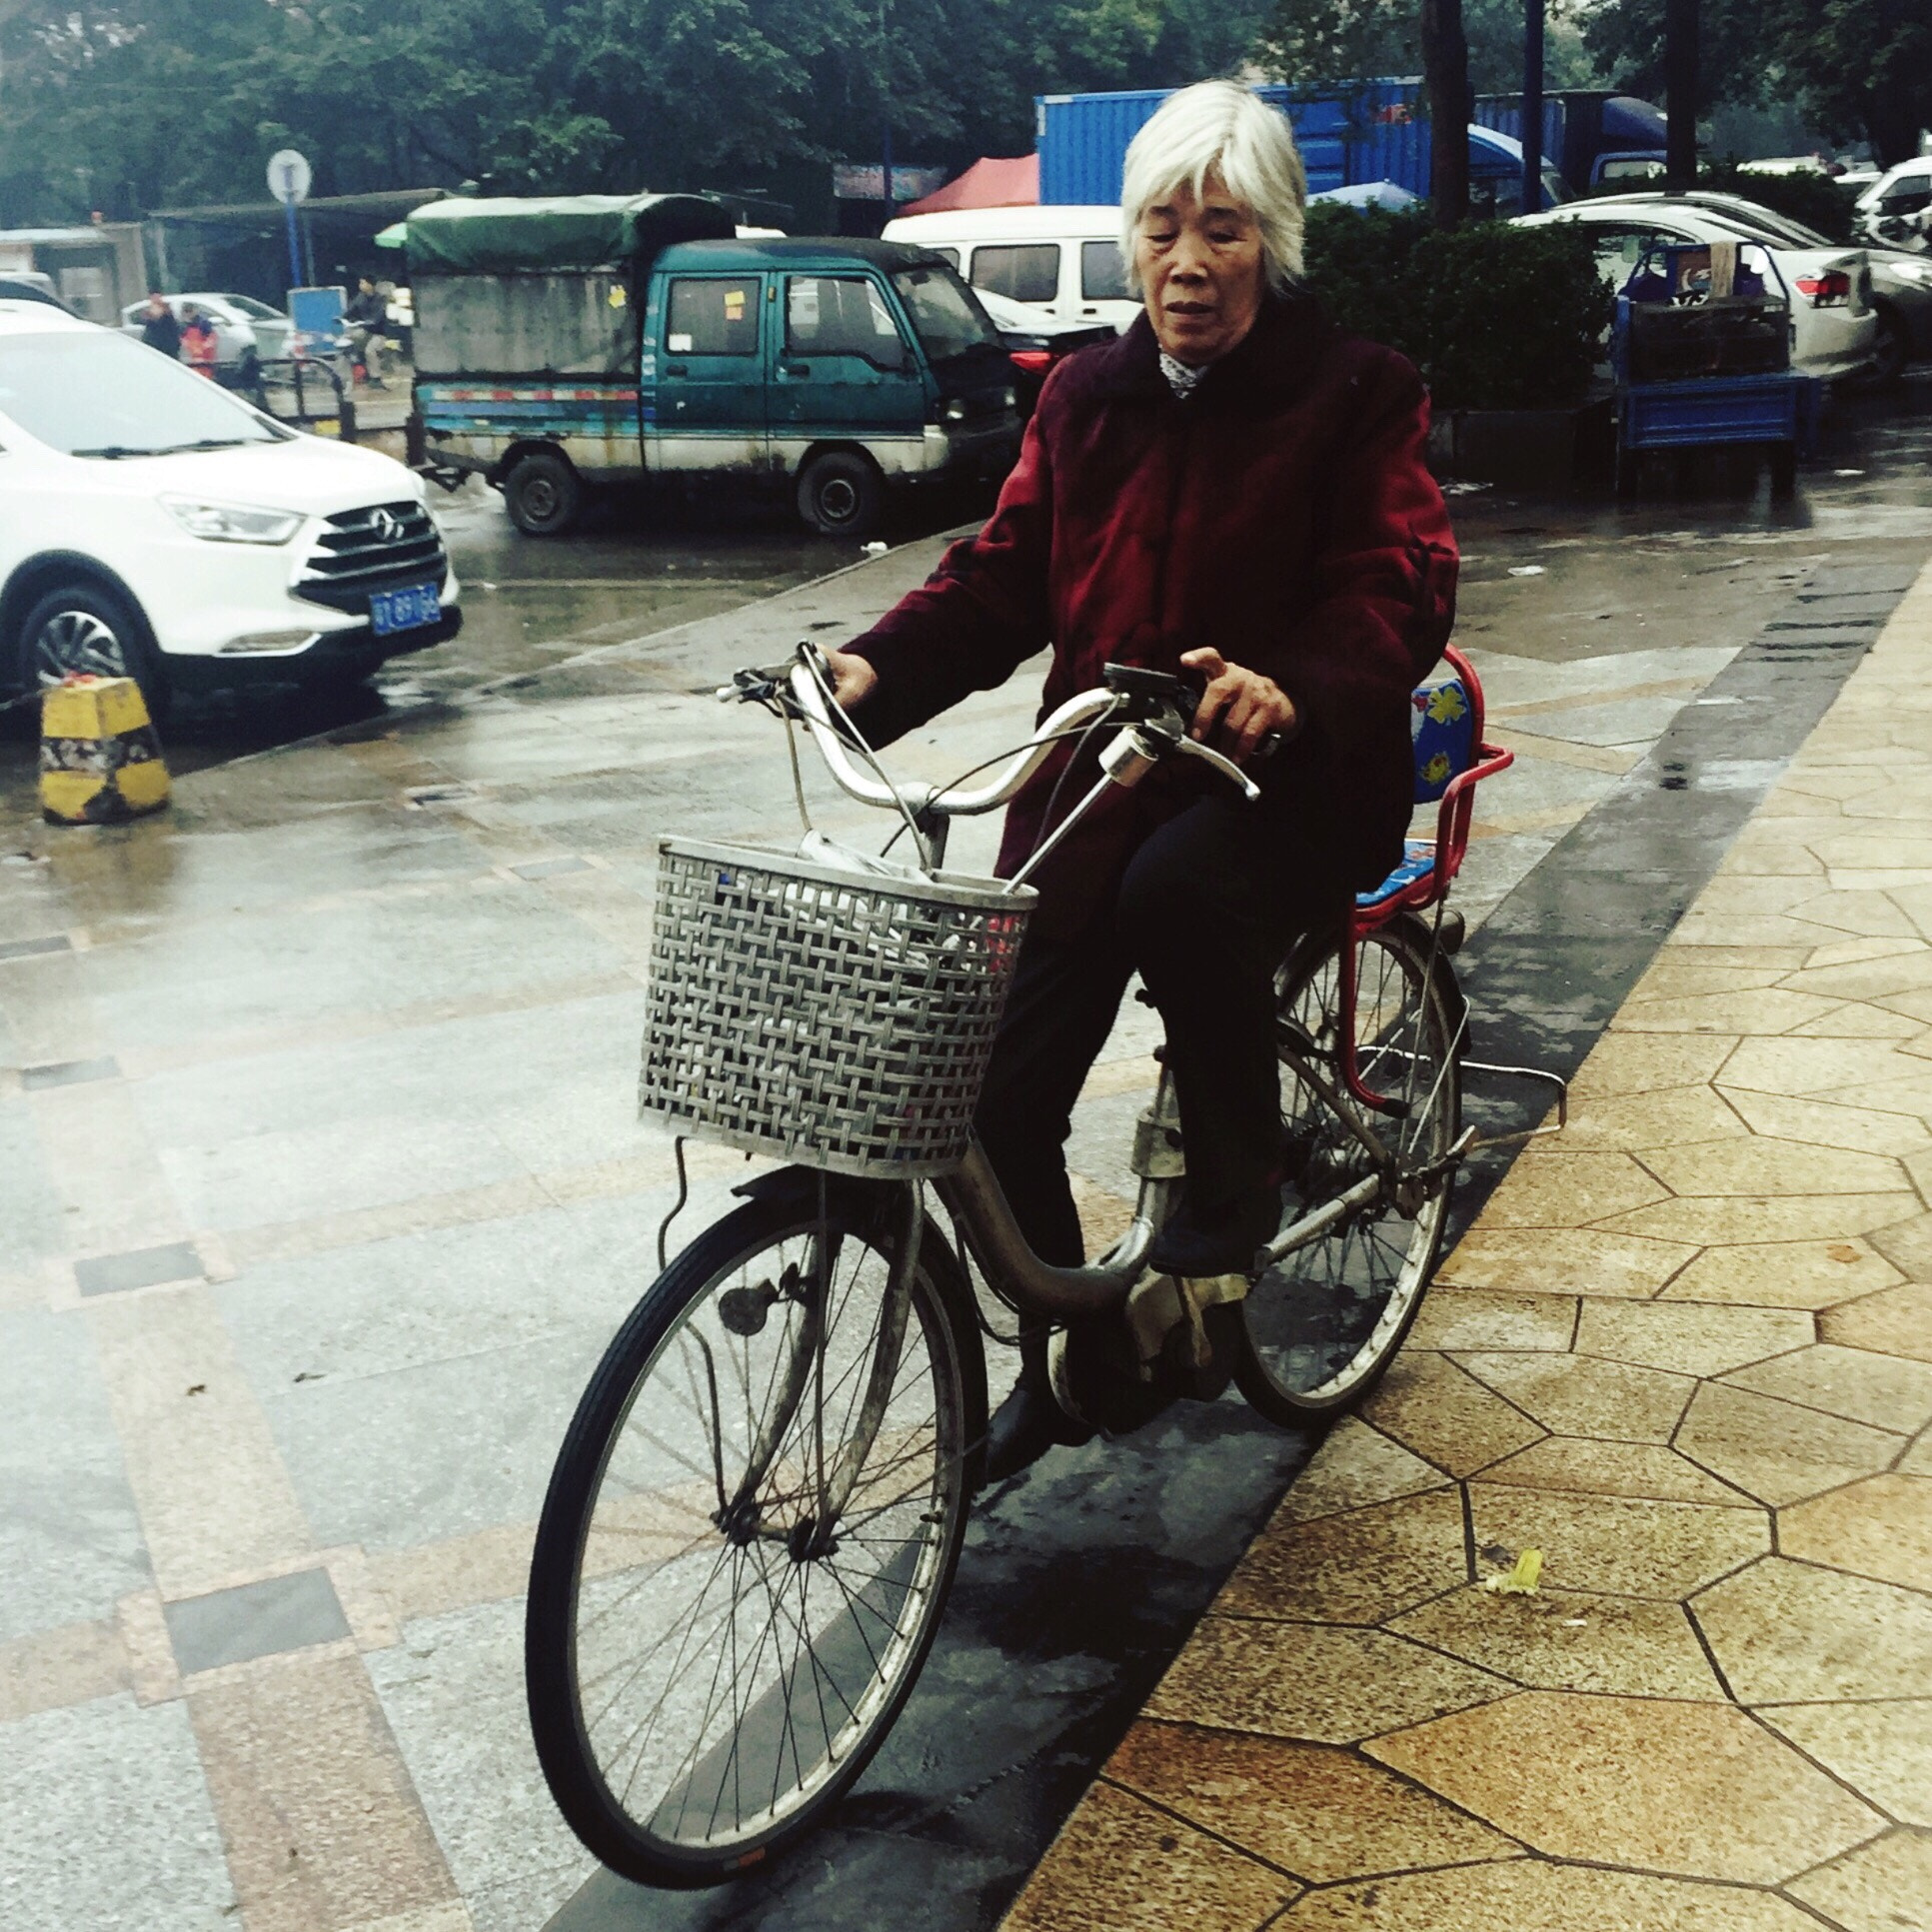 Hipstamatic 310 sample photo. A old lady with white hair riding a bicycle. photography